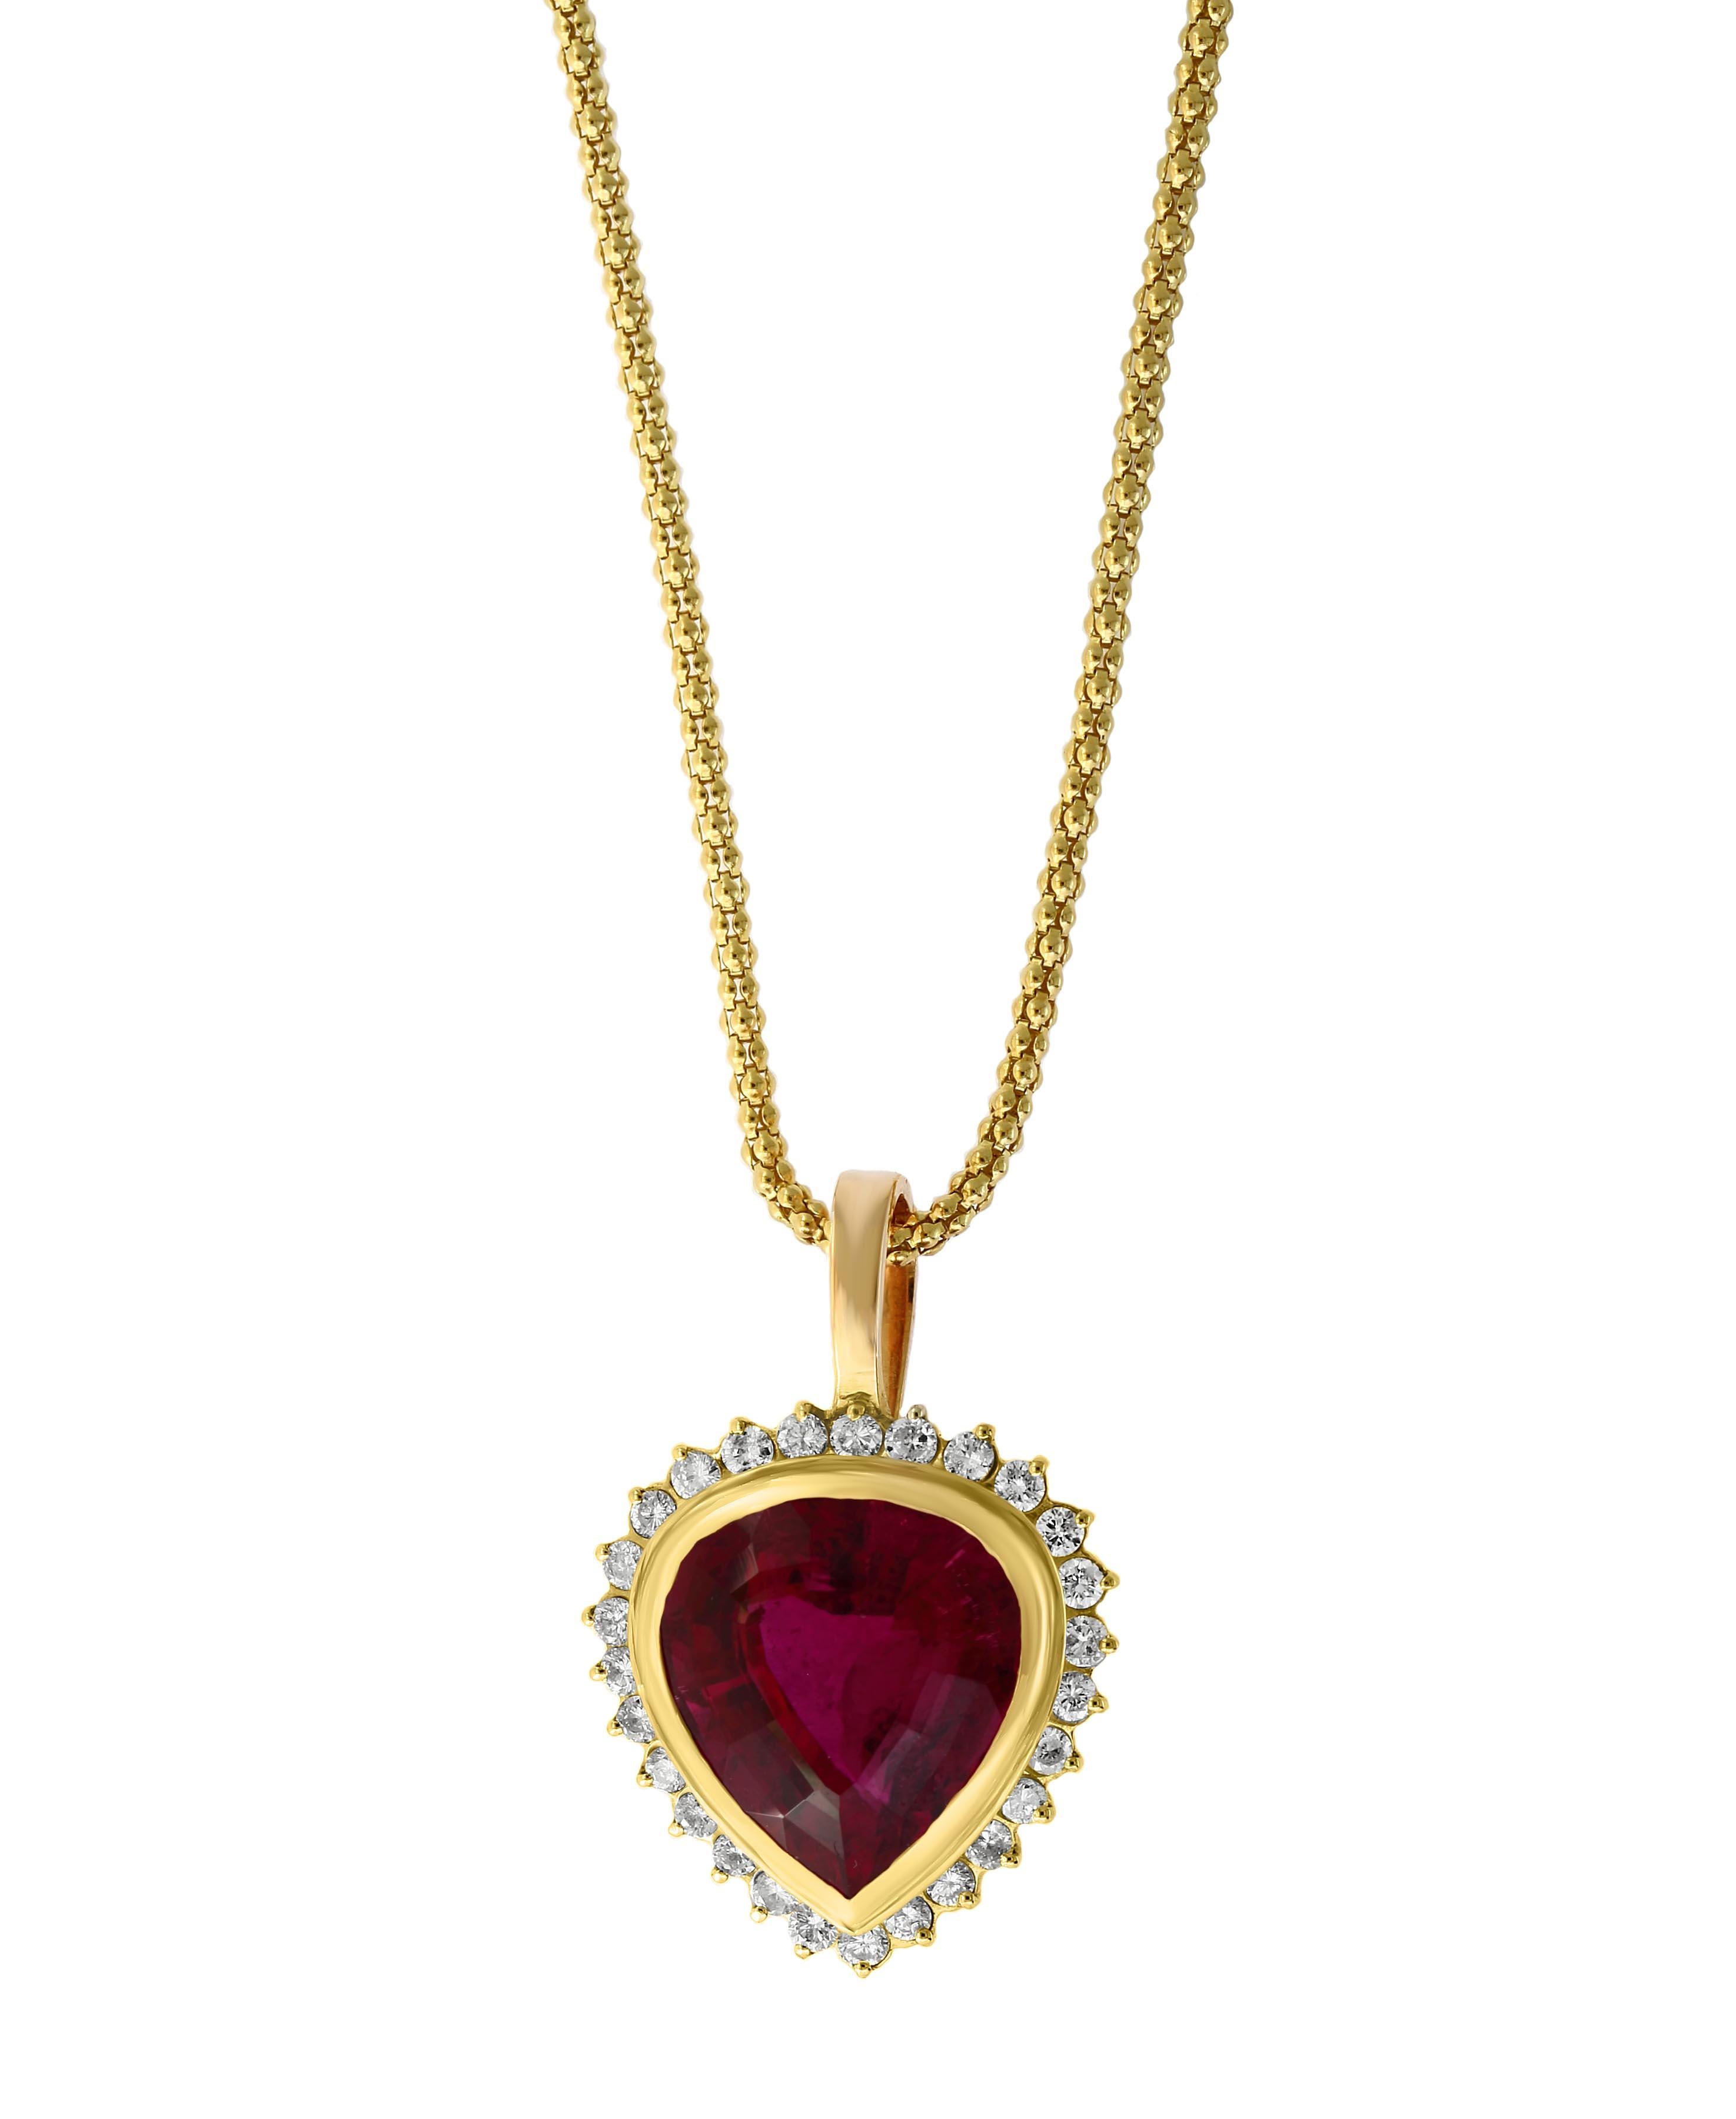 12 Carat Pear Cut Pink Tourmaline and Diamond Pendant Necklace Enhancer
GIA Certified 
Report # 5192640764
This spectacular Pendant Necklace consisting of a single Pear Shape Pink Tourmaline also know as Rubelite , approximately 12 Carat. The Pink